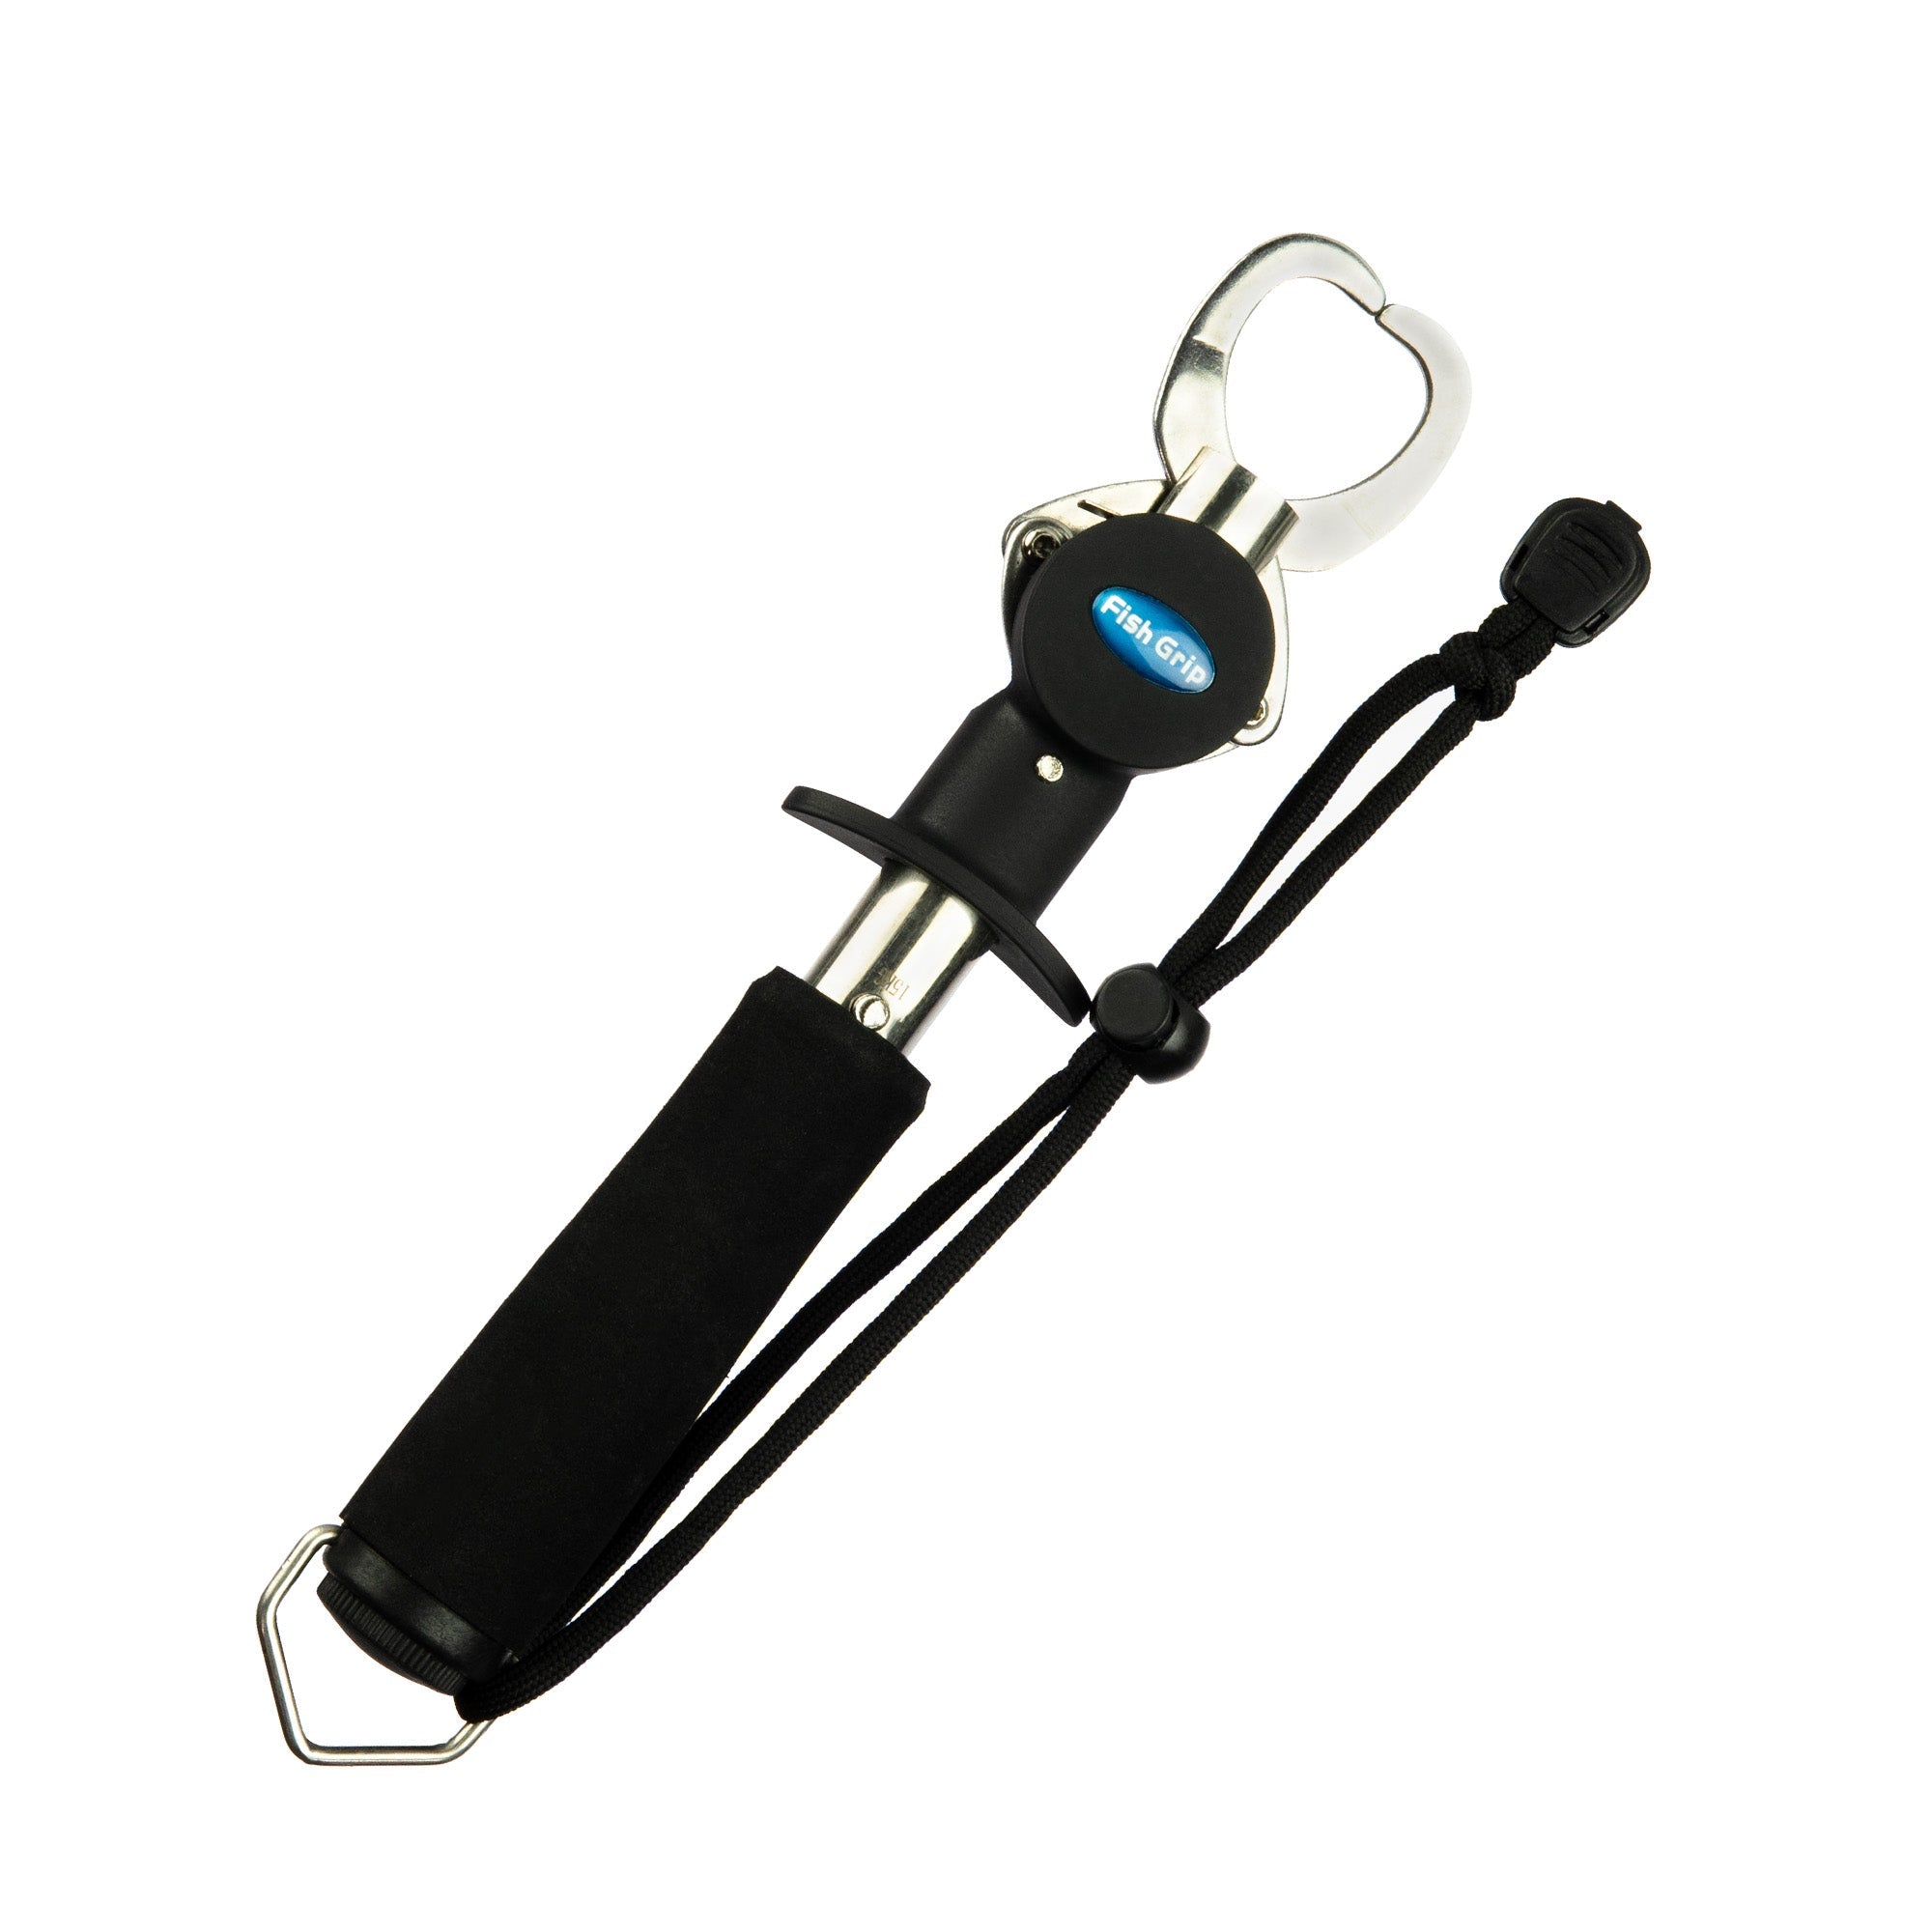 Fish Gripper for Fishing with Scale Fishing Gear Gift Saltwater Professional